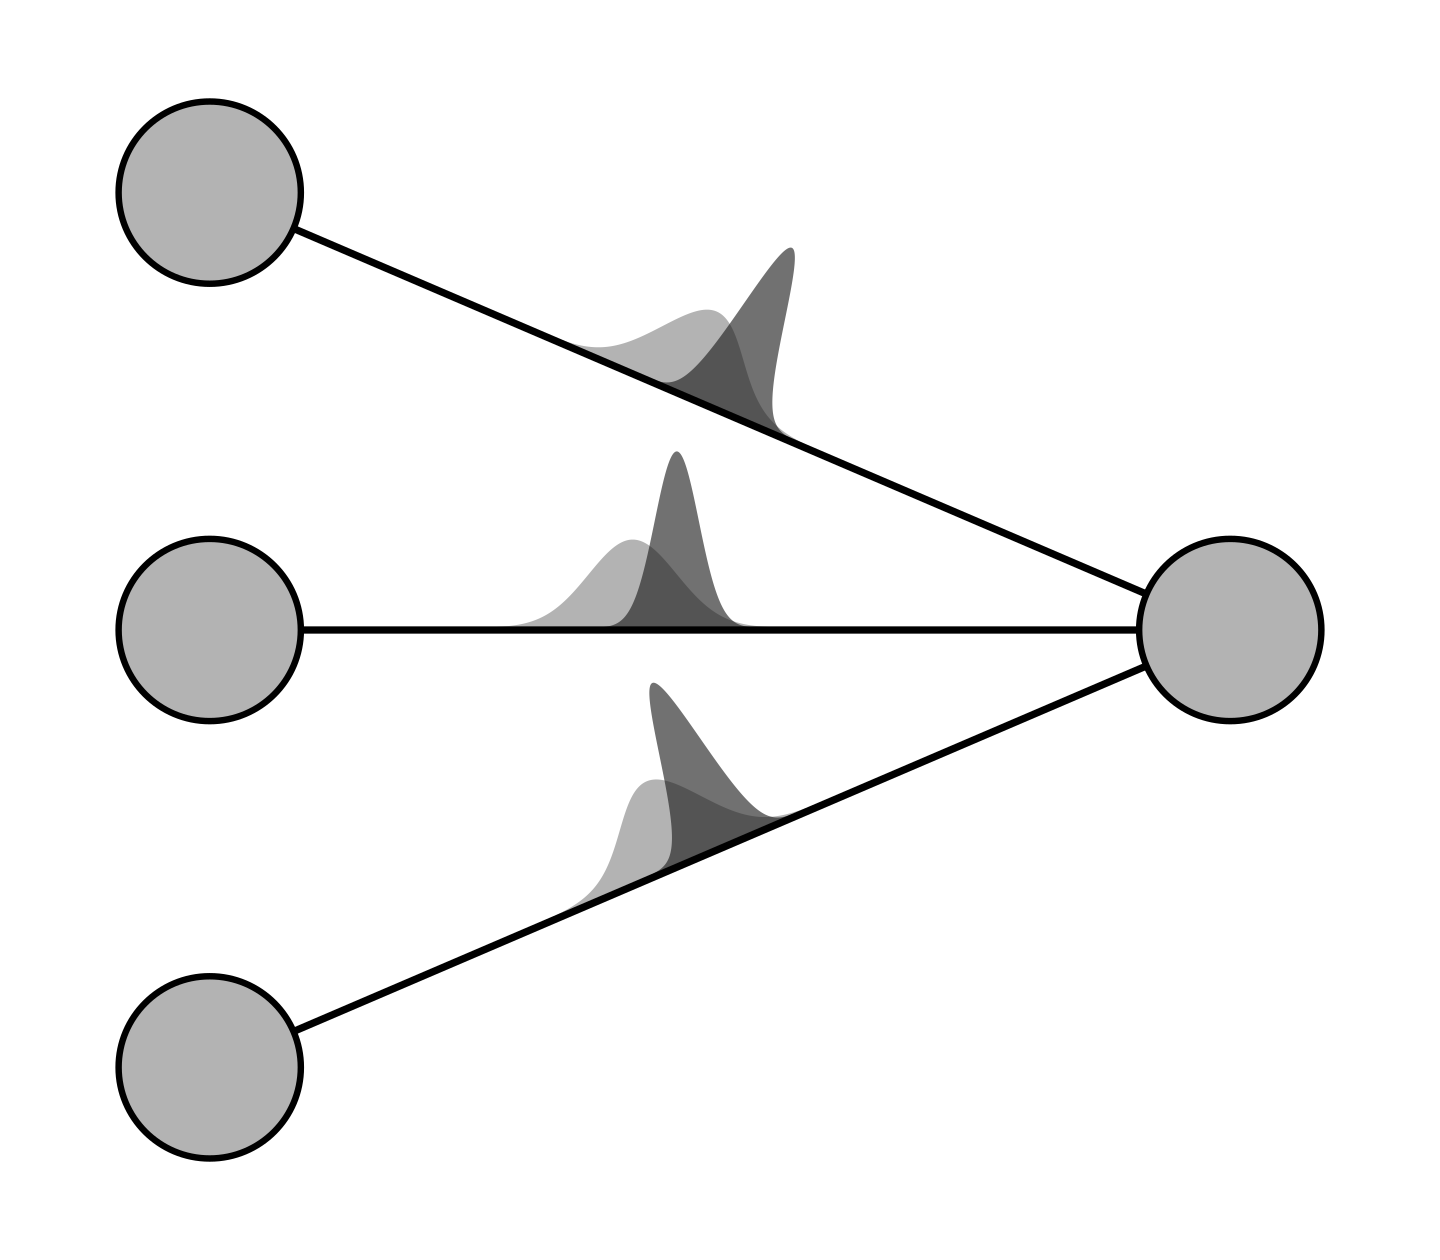 Bayesian neural network with probabilistic weights